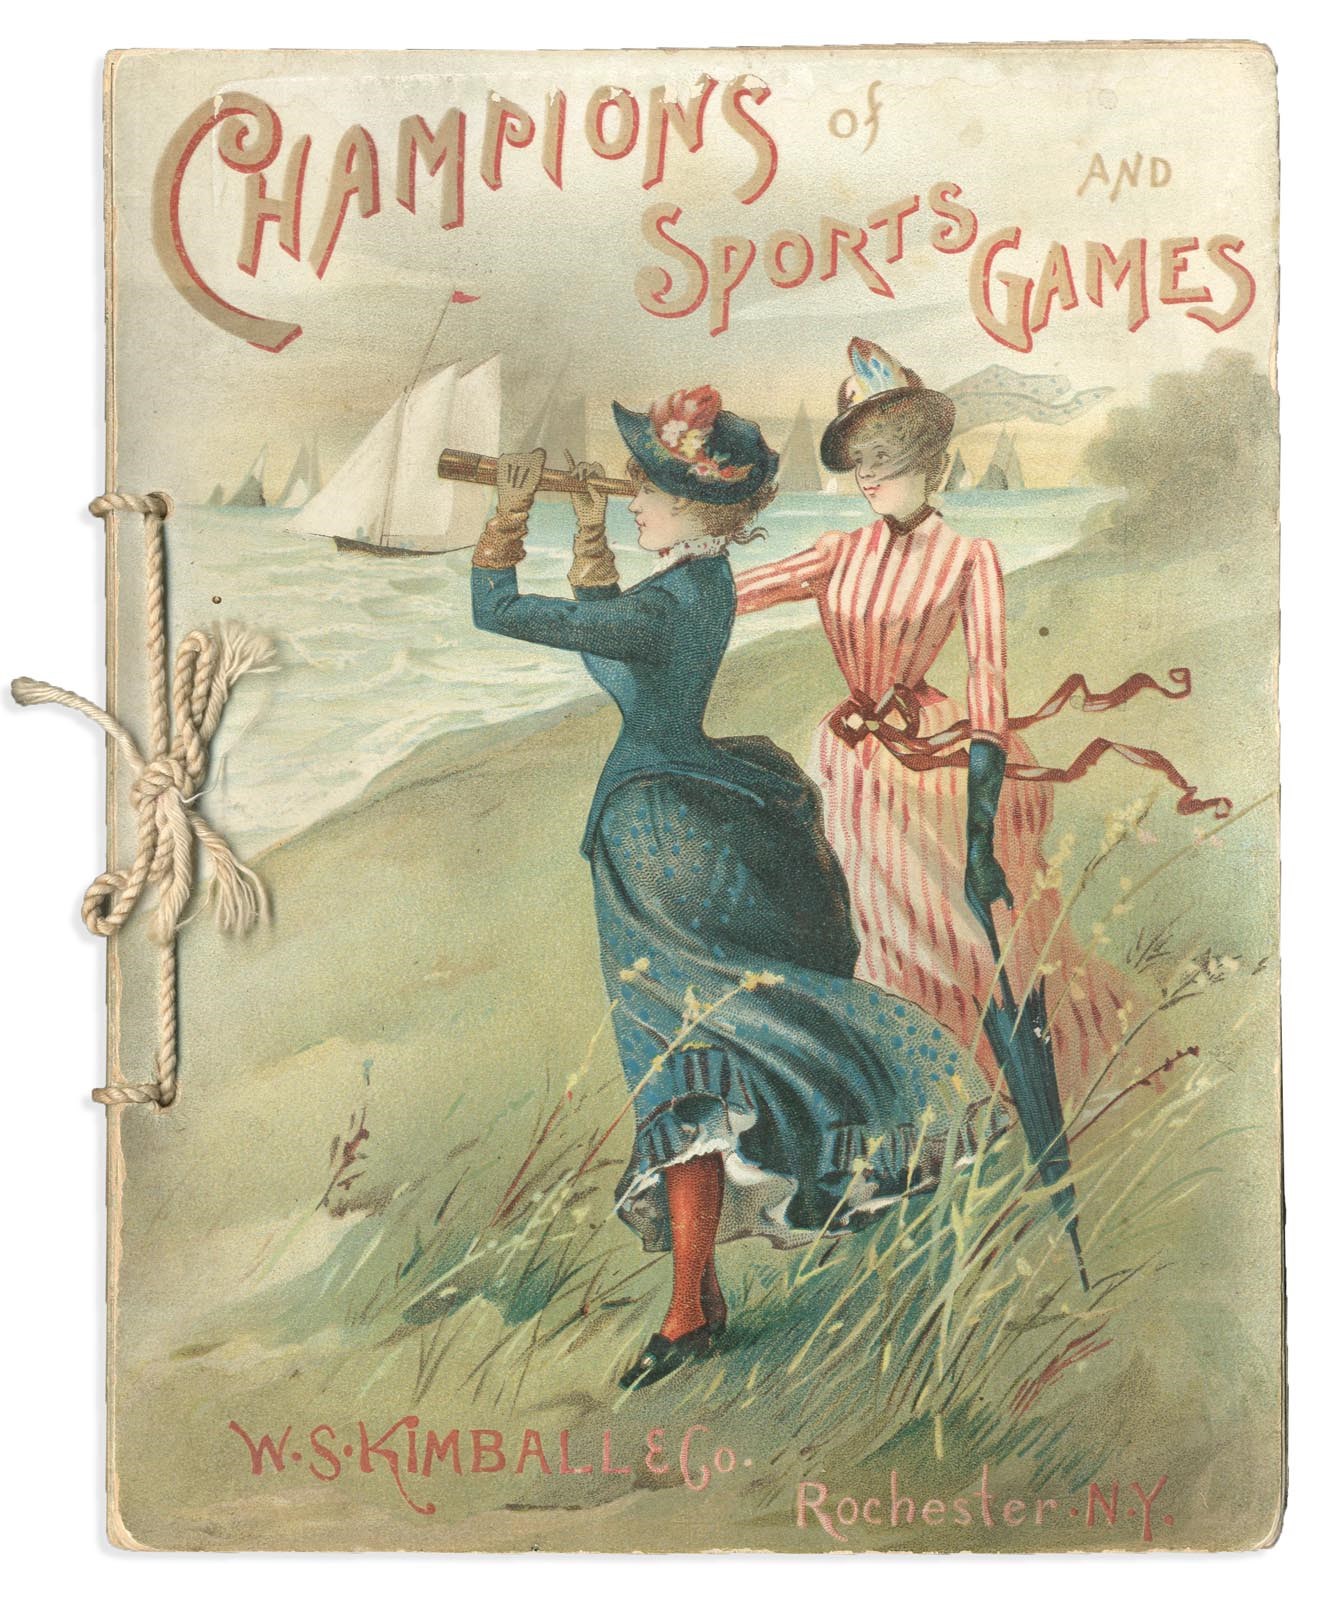 Baseball and Trading Cards - 1888 W.S. Kimball Champions of Sports & Games Premium Book